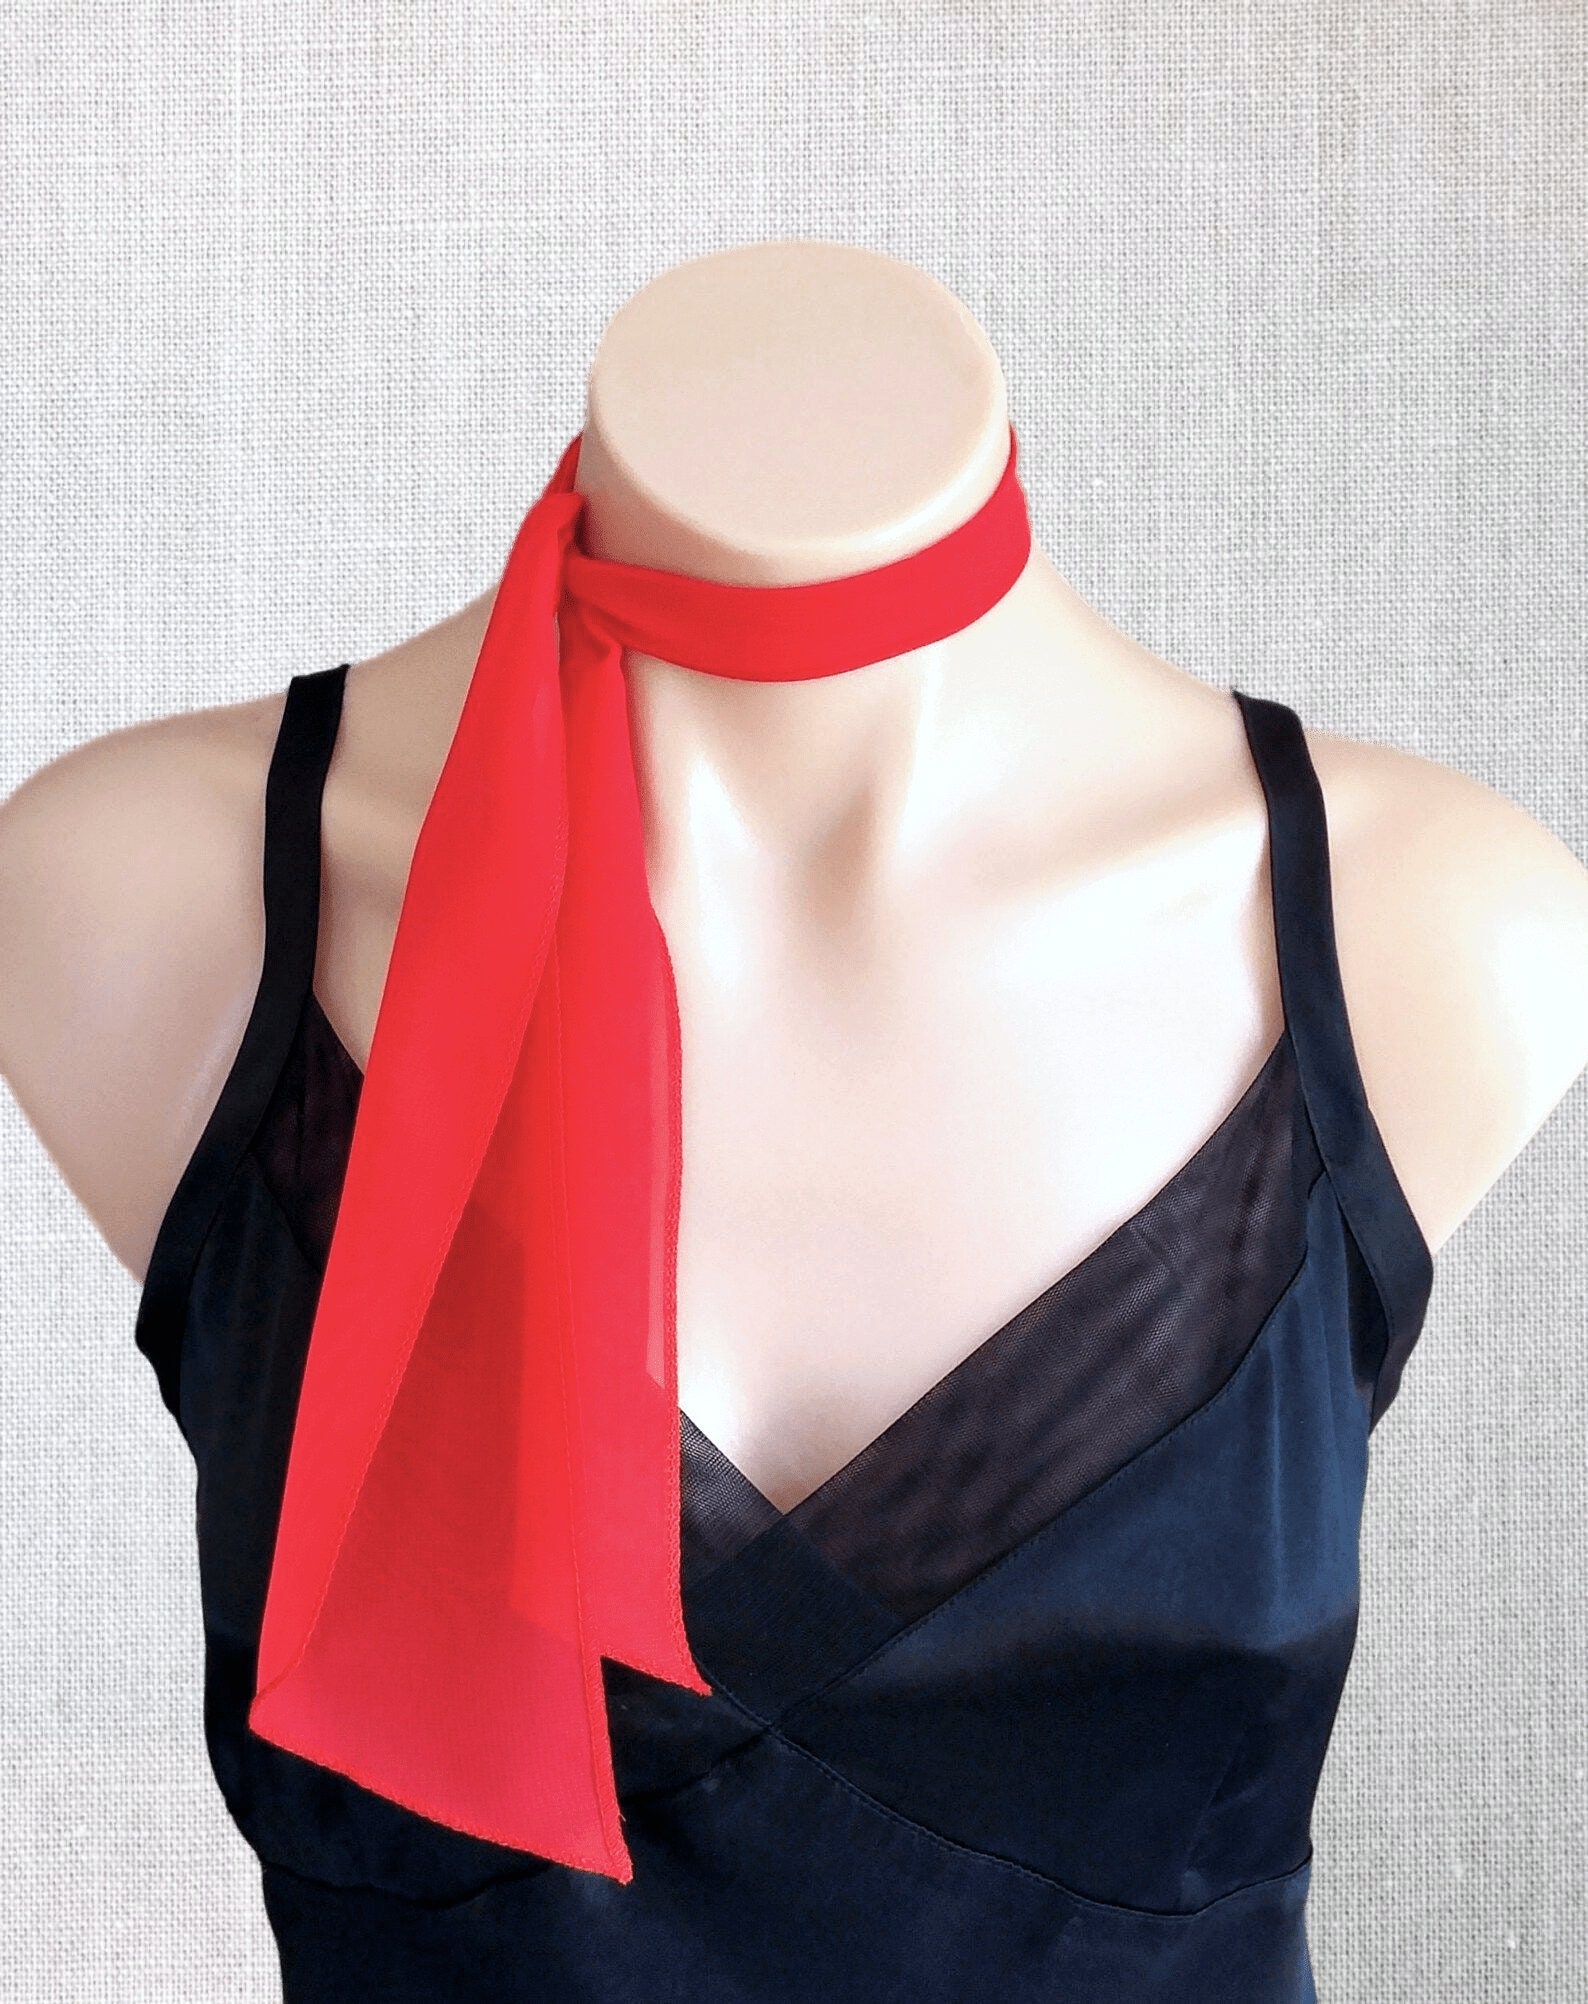 Beautiful Reversible Red Floral & Black Dot Silk Square Head Scarf